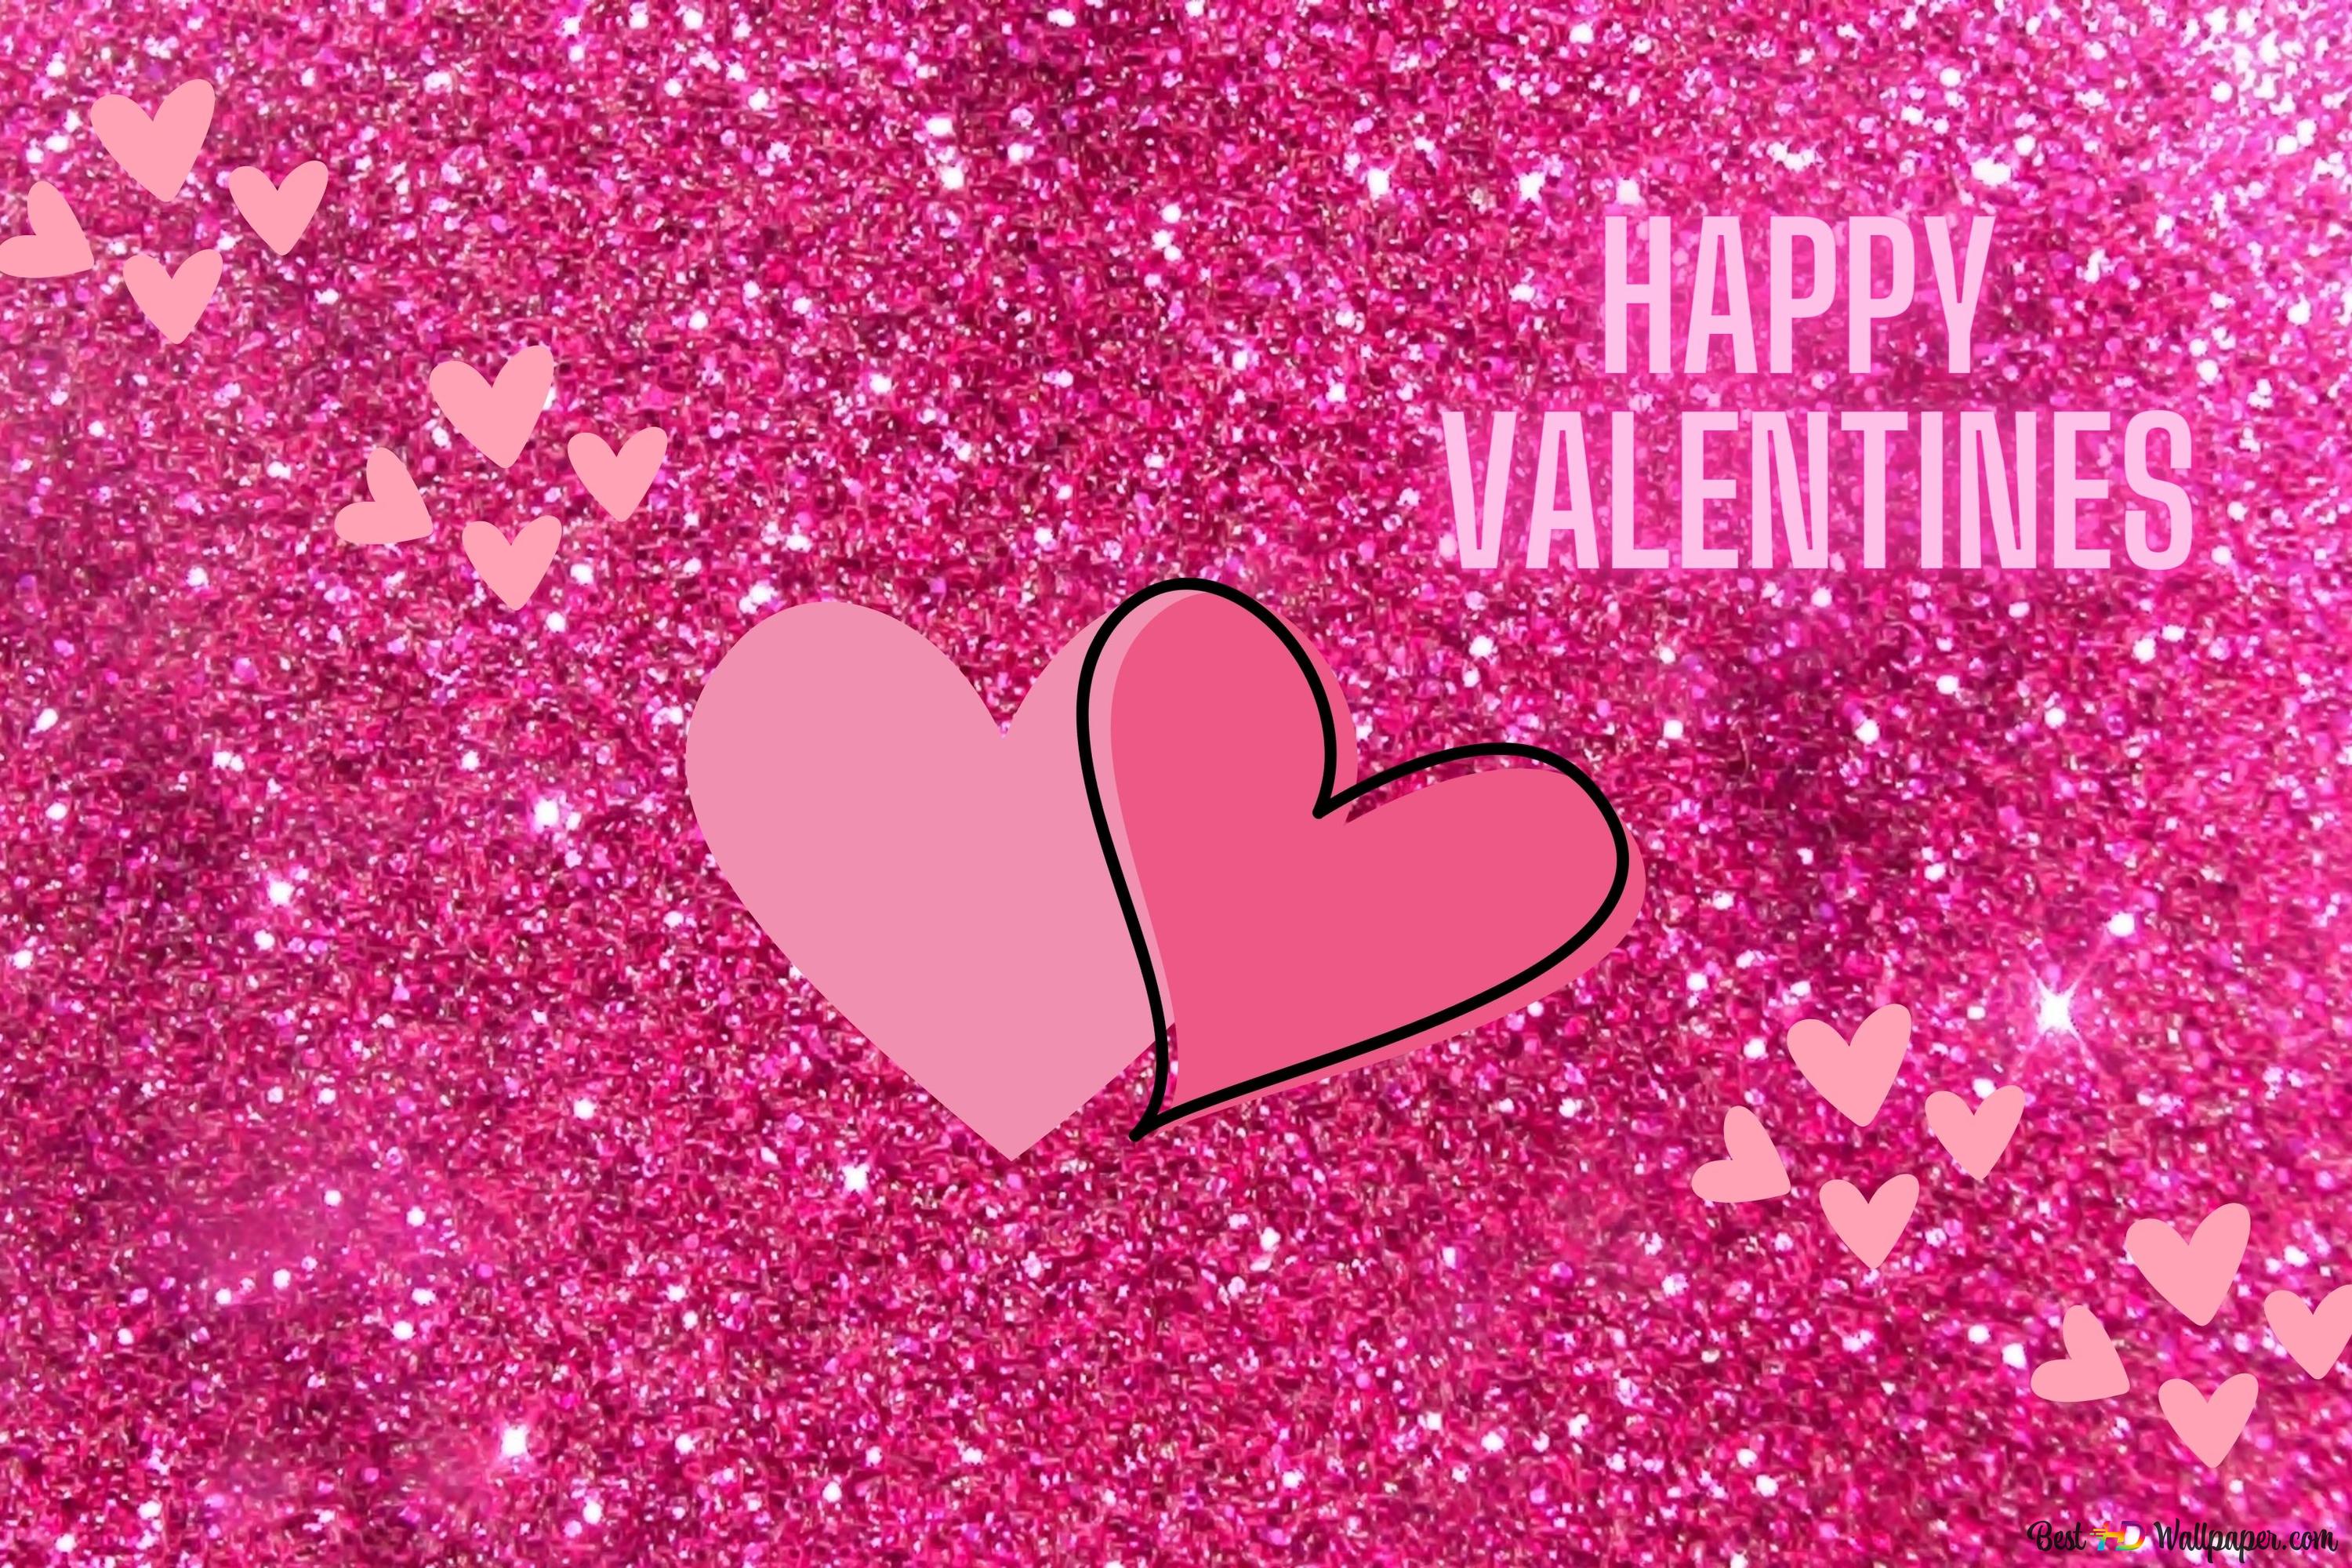 A Happy Valentines Day to You 4K wallpaper download